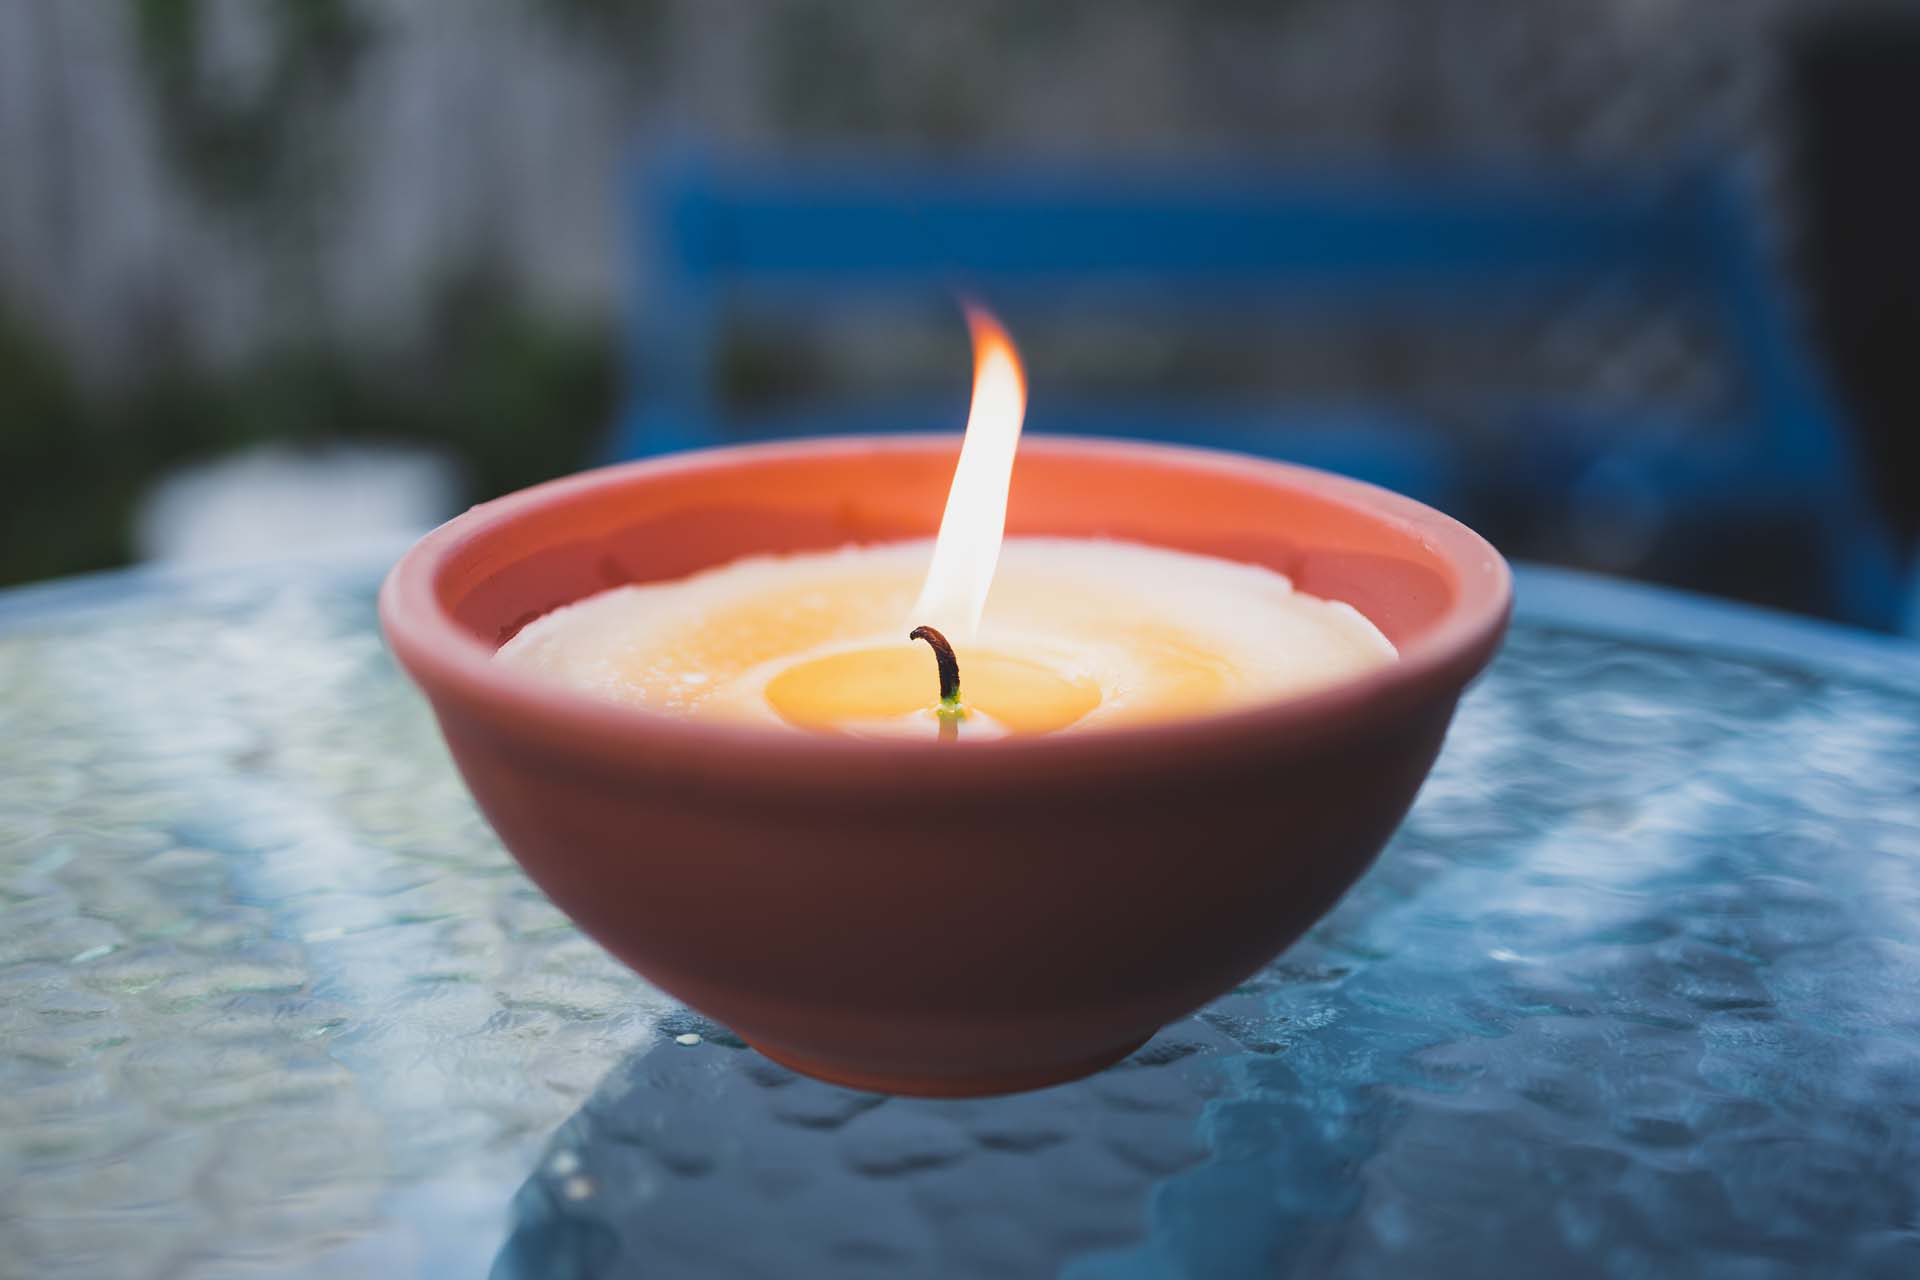 Citronella candle with flame outdoor on cafe table setting at dusk for protection against mosquitoes during summer nights